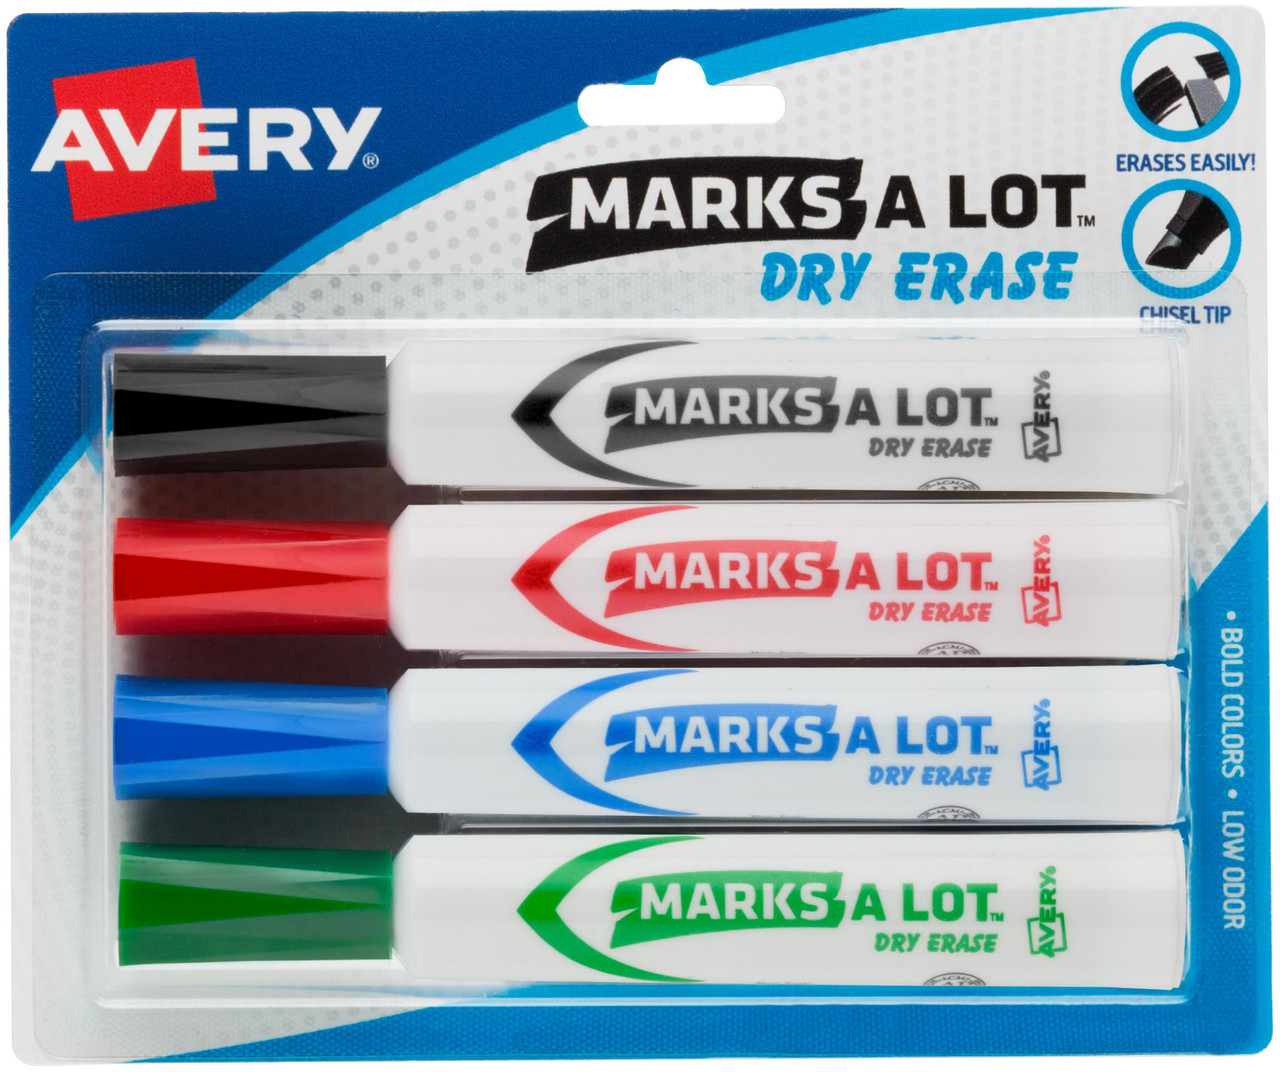 Expo Magnetic Dry Erase Markers with Eraser, Chisel Tip, Assorted, 4 per Pack, 3 Packs